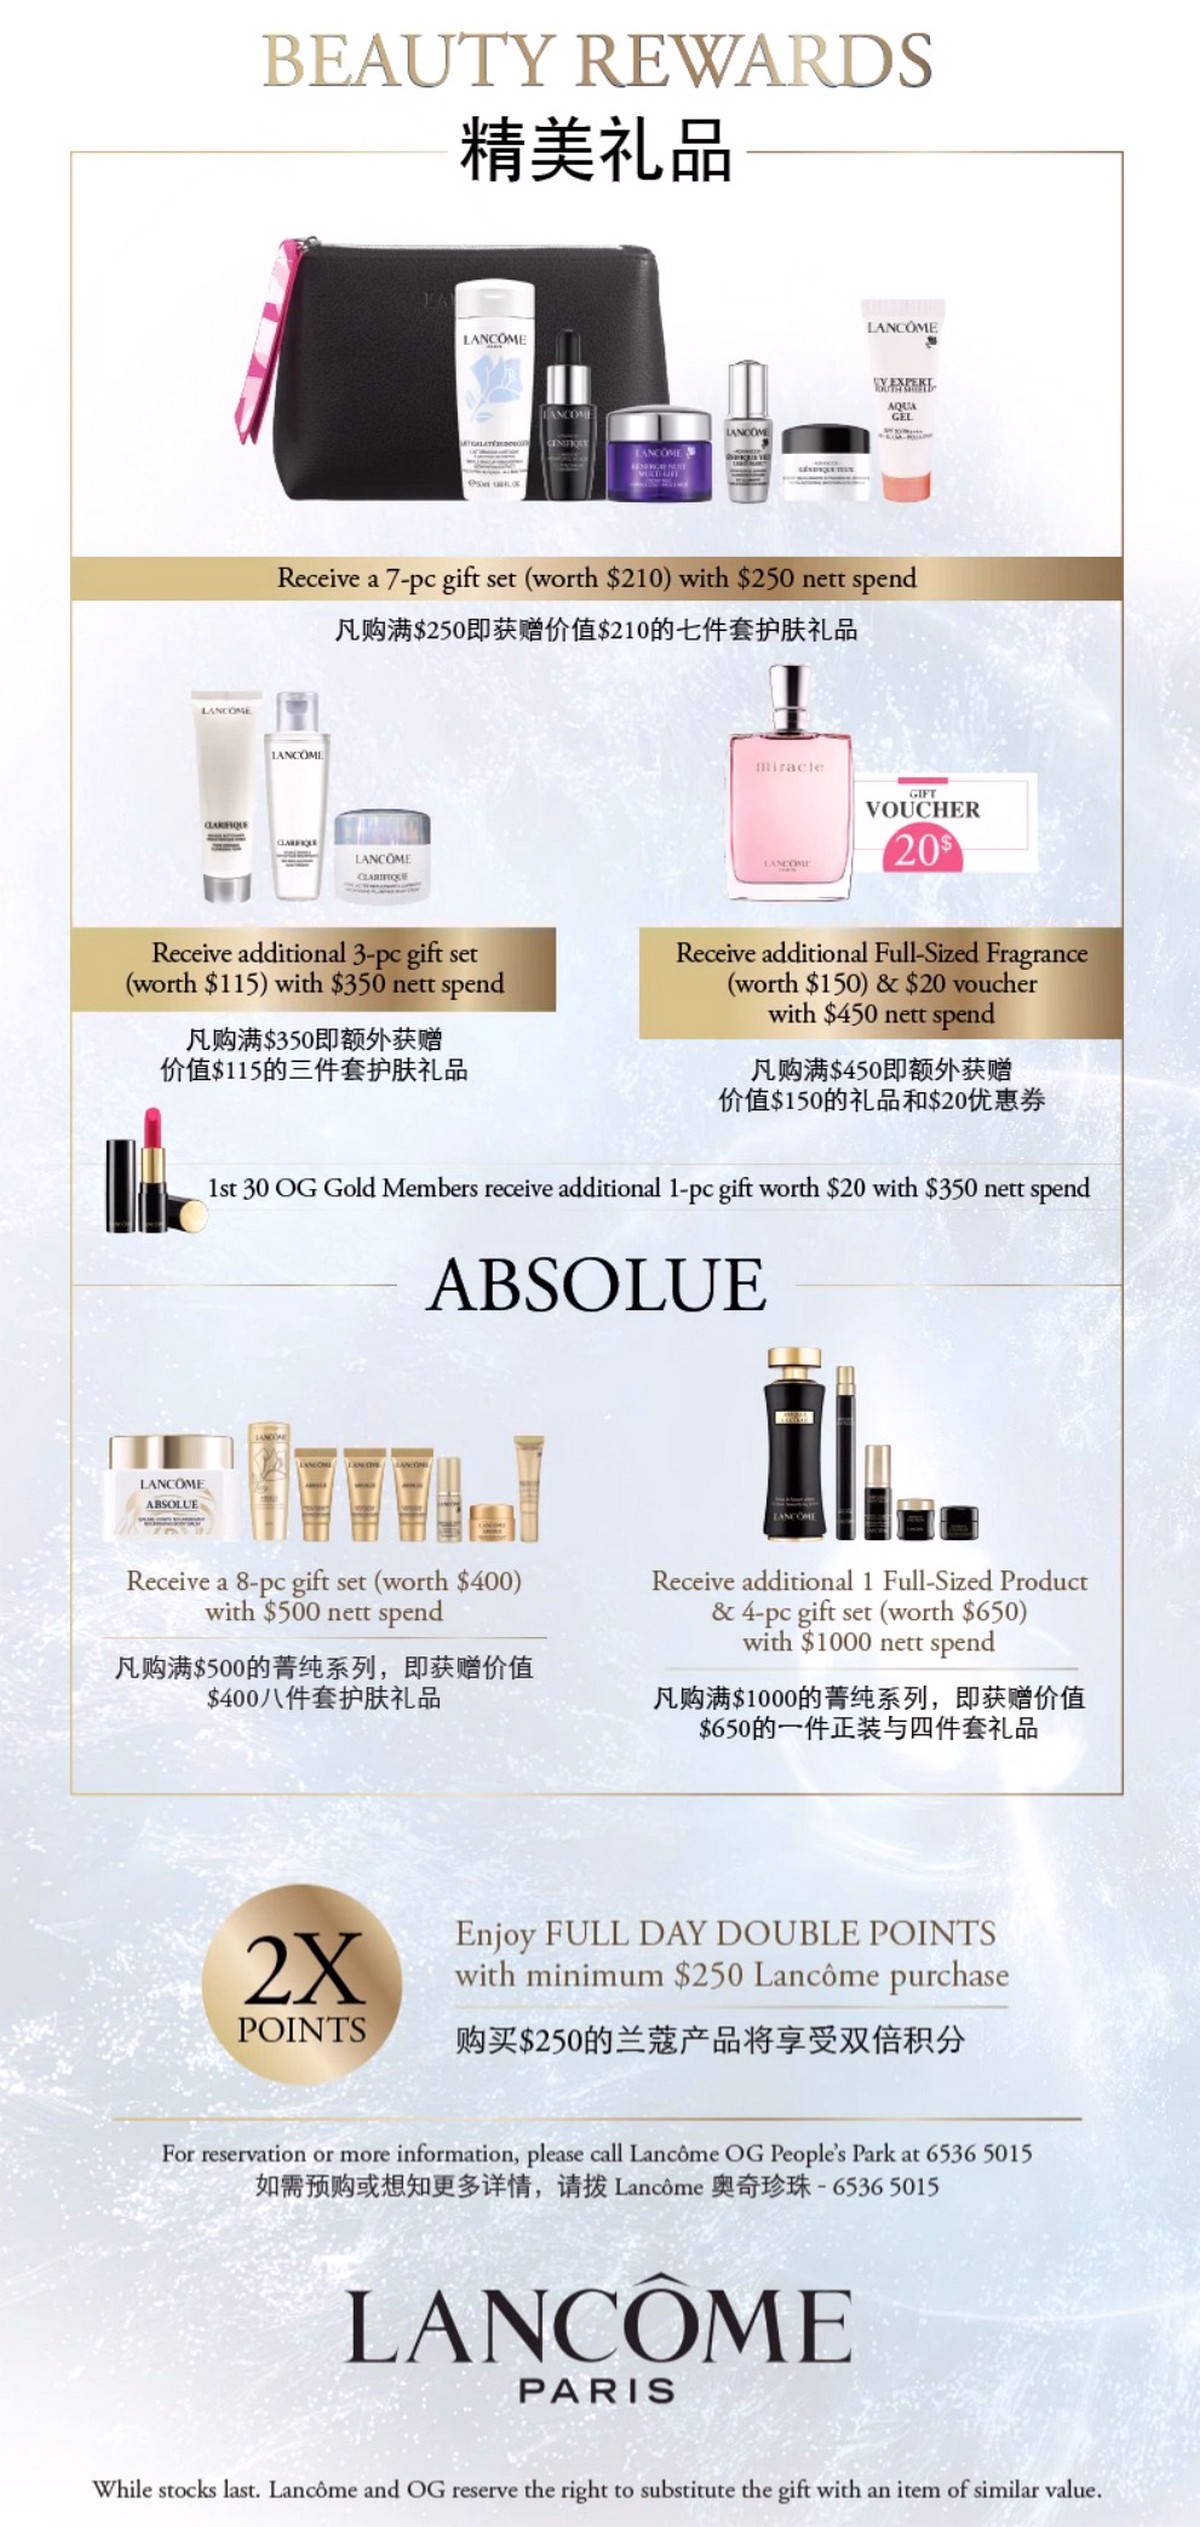 Lancome-03 20 Apr-9 May 2021: Lancôme at OG People’s Park Exclusive One-time Offer Promotion! Buy 50ml get 49ml (Saving of $172)